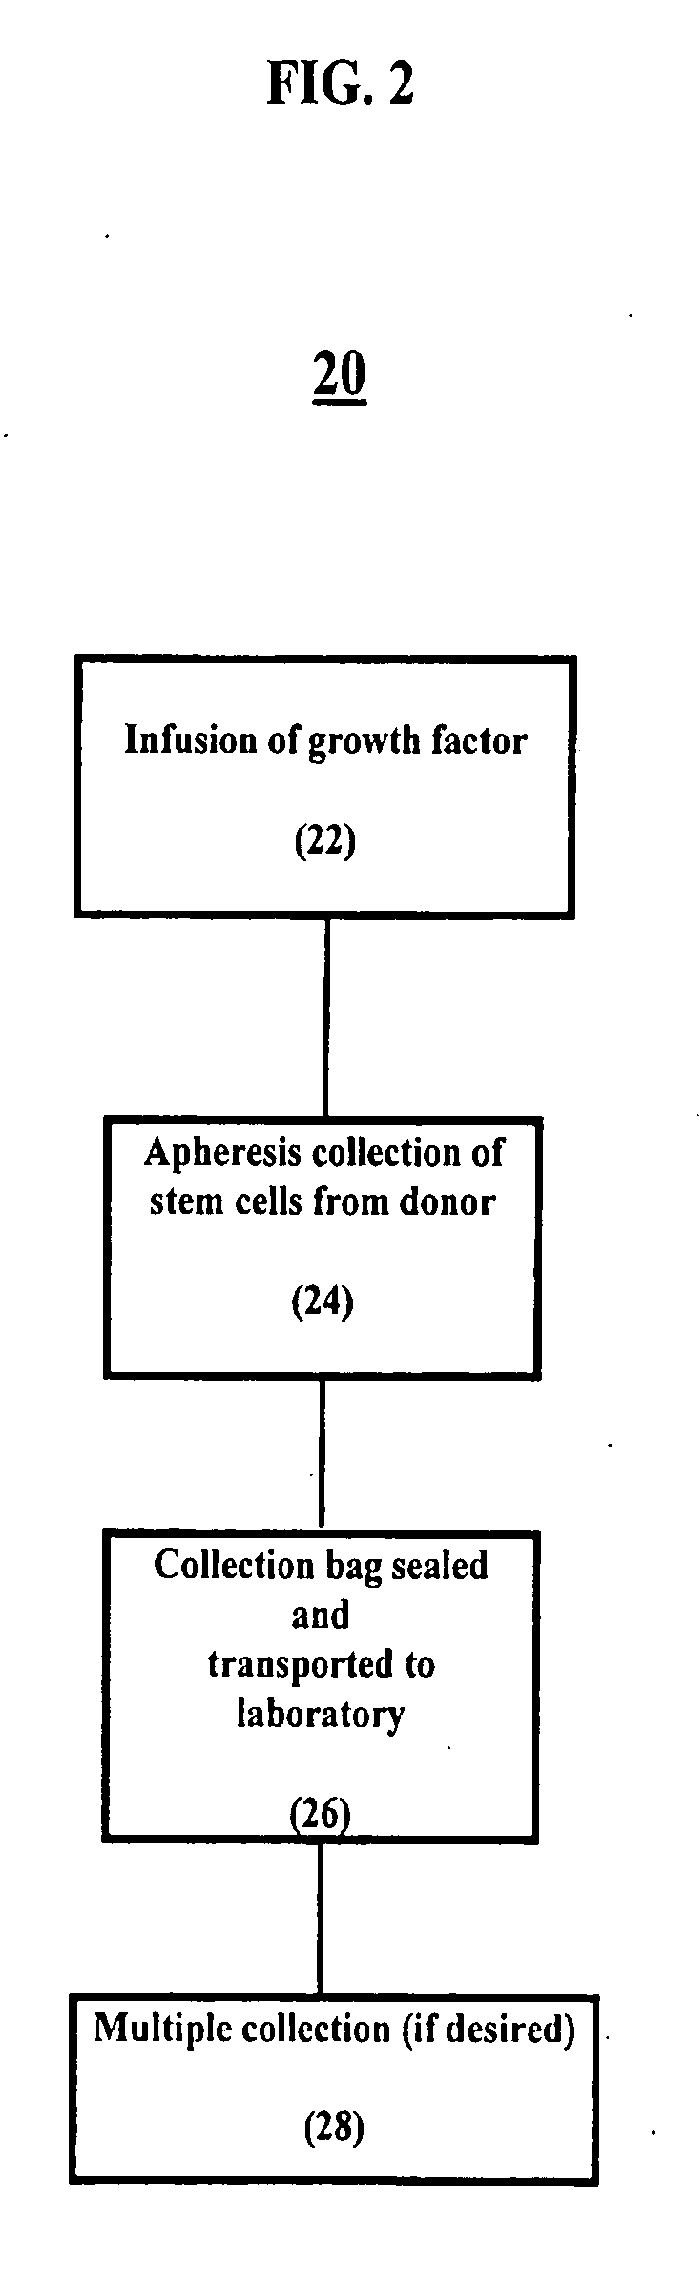 Elective Collection and Banking of Autologous Peripheral Blood Stem Cells